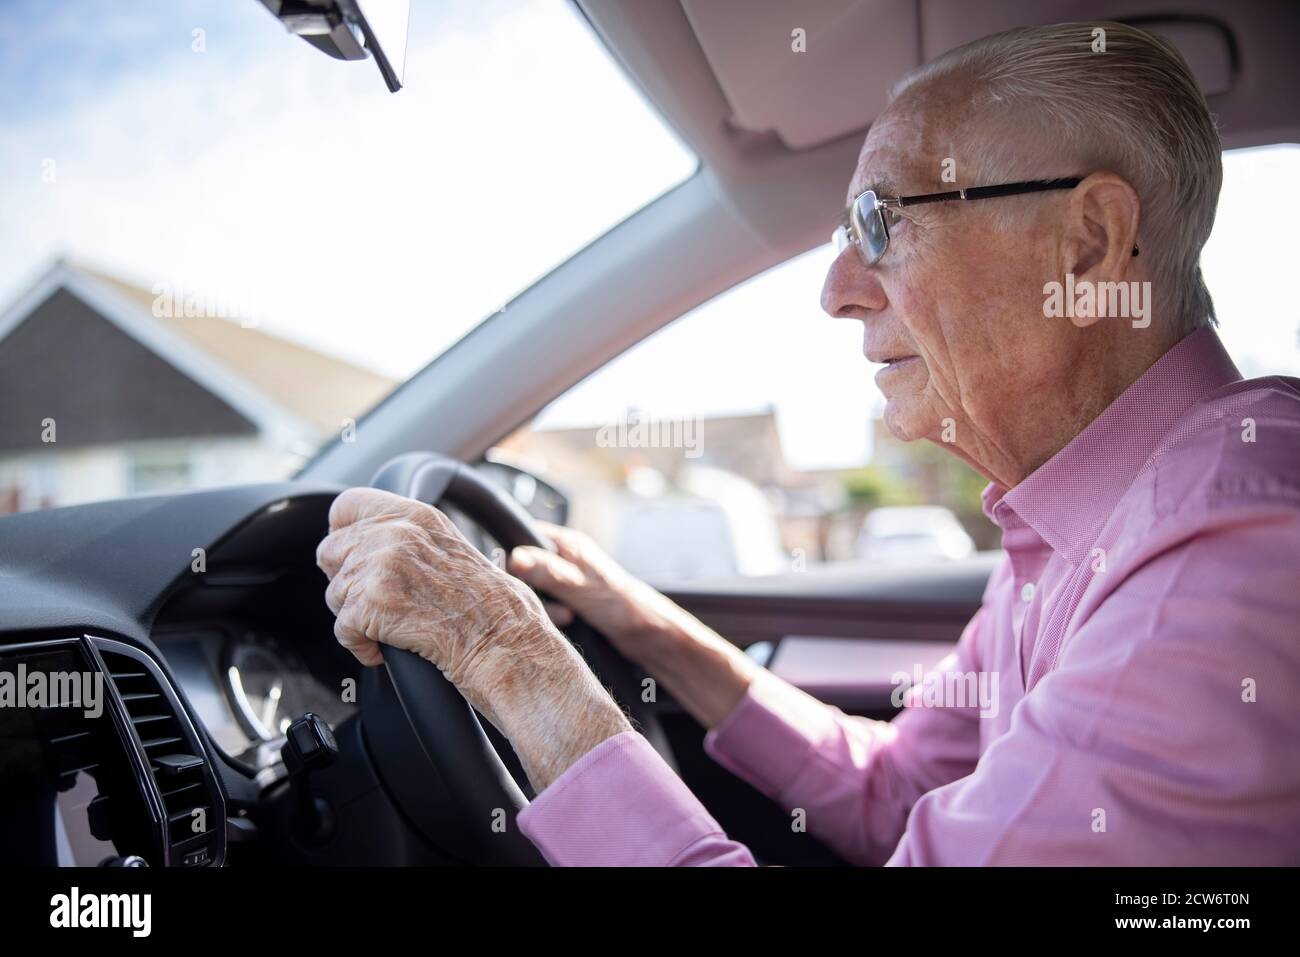 Worried Senior Male Driver Looking Through Car Windscreen Stock Photo